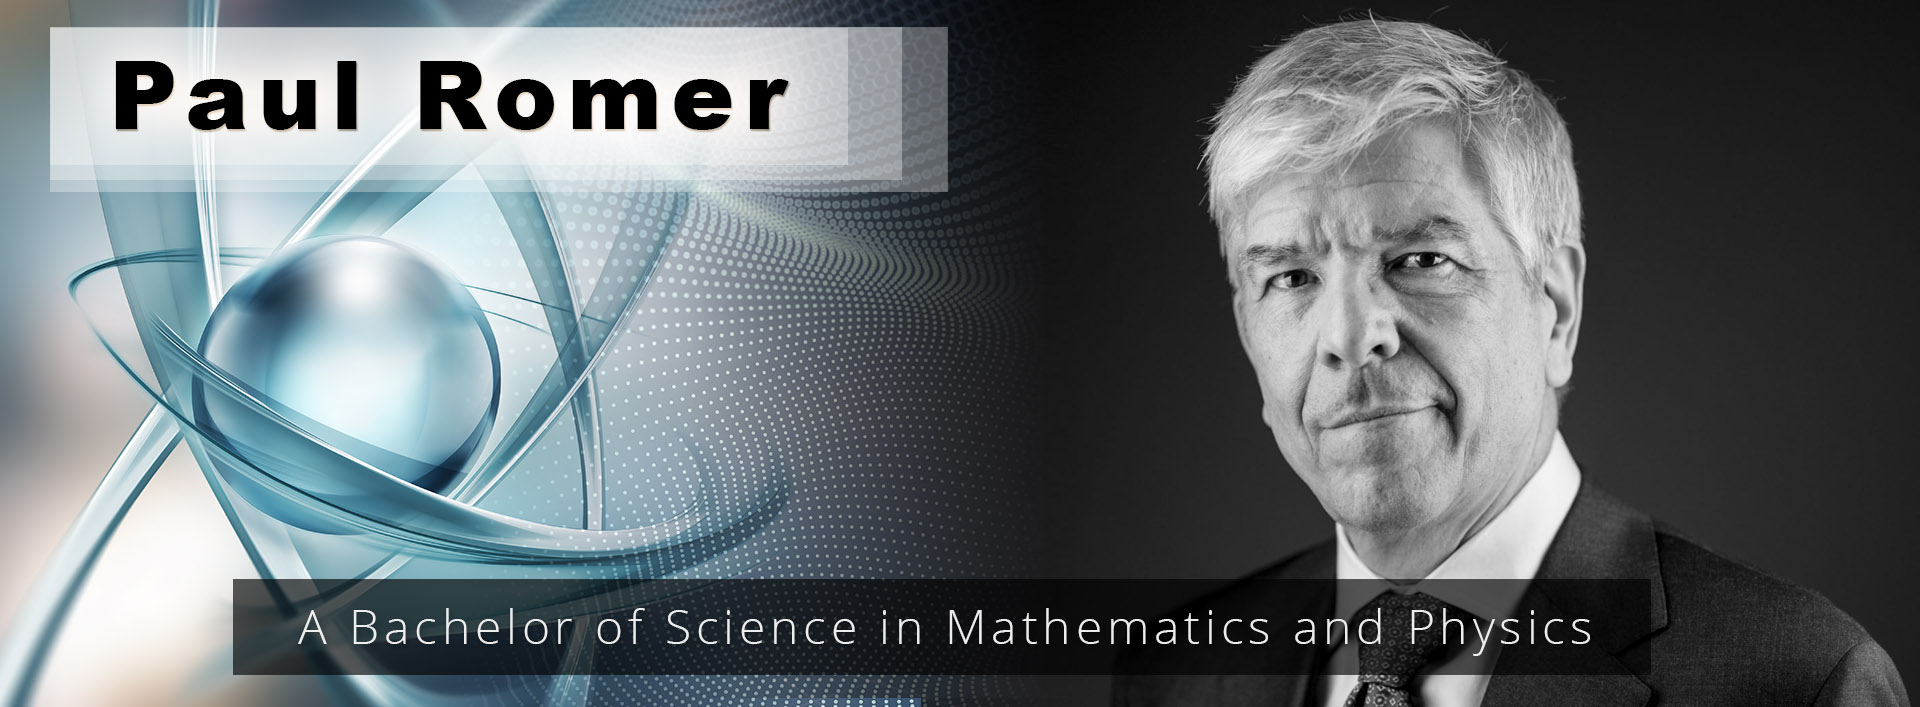 Paul-Romer__A-Bachelor-of Science-in-Mathematics-and-Physics